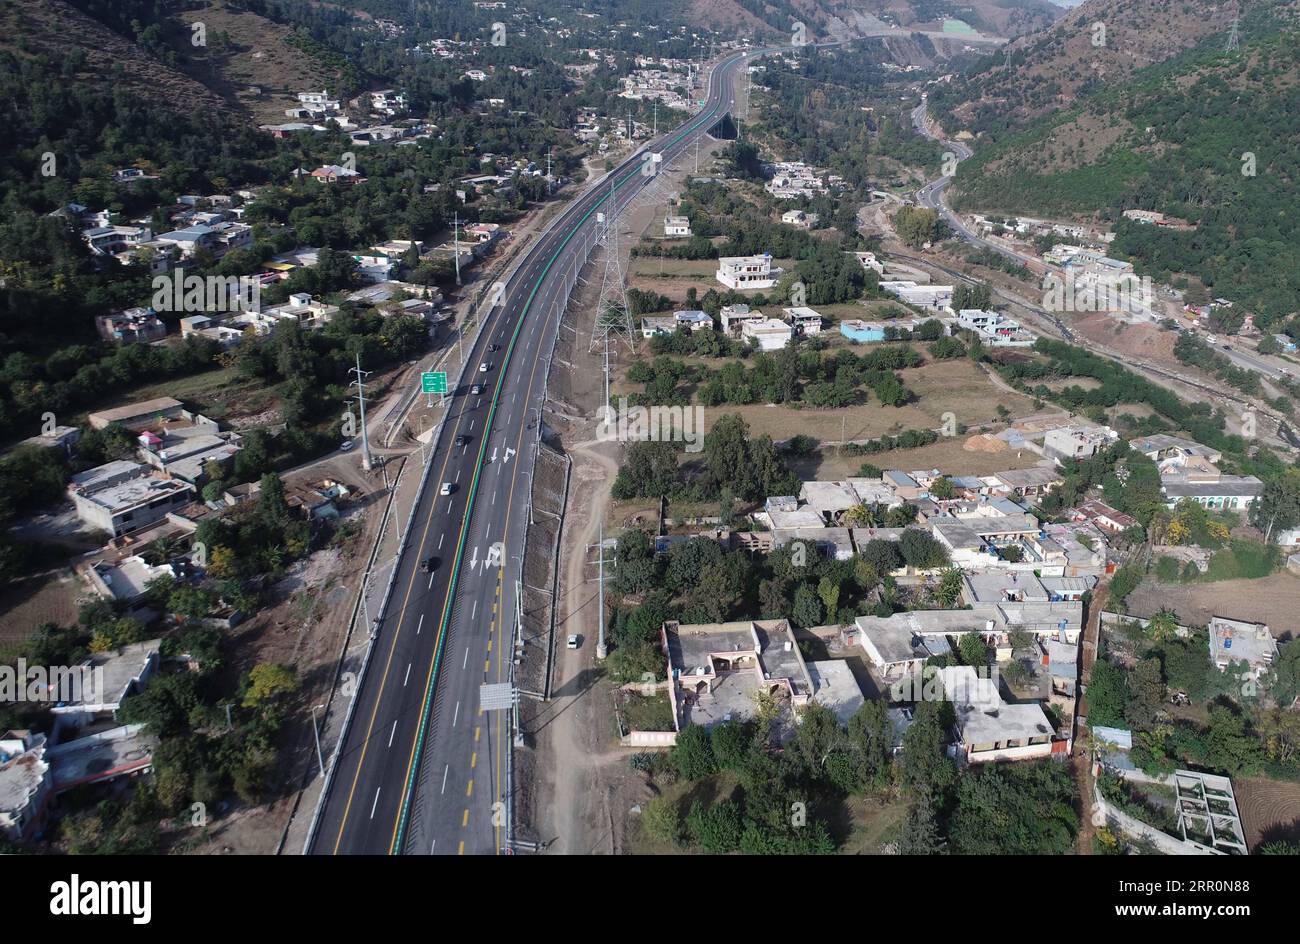 200821 -- ISLAMABAD, Aug. 21, 2020 -- Photo taken on Nov. 18, 2019 shows the expressway section from Havelian to Mansehra under the Karakoram Highway KKH Phase Two project in Pakistan s northwest Khyber Pakhtunkhwa province. TO GO WITH XINHUA HEADLINES OF AUG. 21, 2020.  PAKISTAN-CHINA-KARAKORAM HIGHWAY-PHASE TWO PROJECT LiuxTian PUBLICATIONxNOTxINxCHN Stock Photo